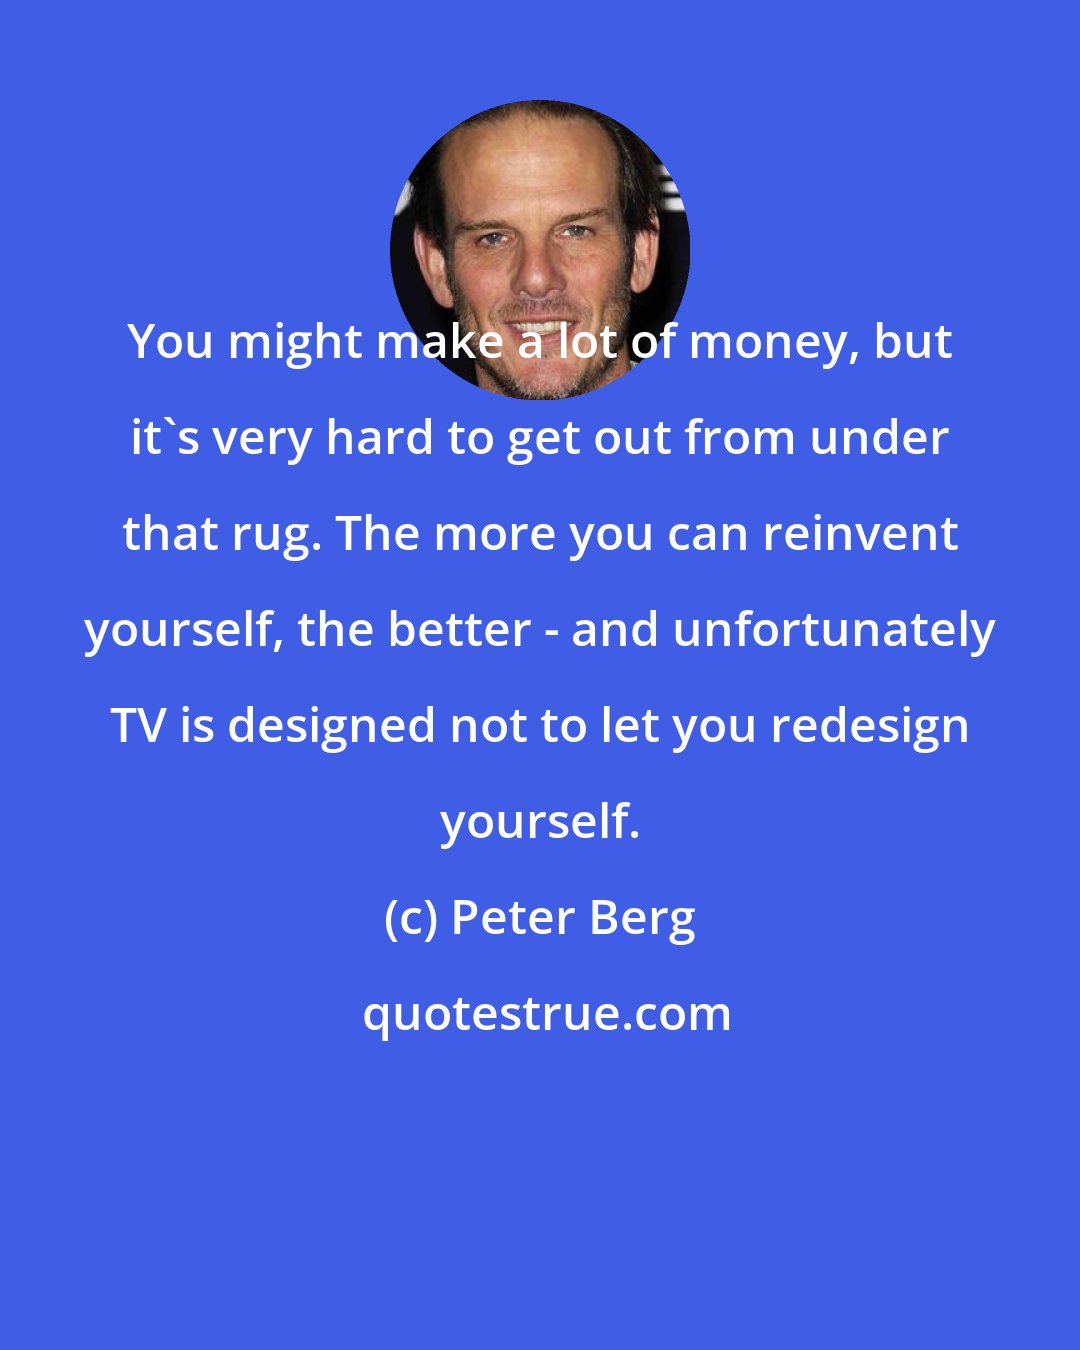 Peter Berg: You might make a lot of money, but it's very hard to get out from under that rug. The more you can reinvent yourself, the better - and unfortunately TV is designed not to let you redesign yourself.